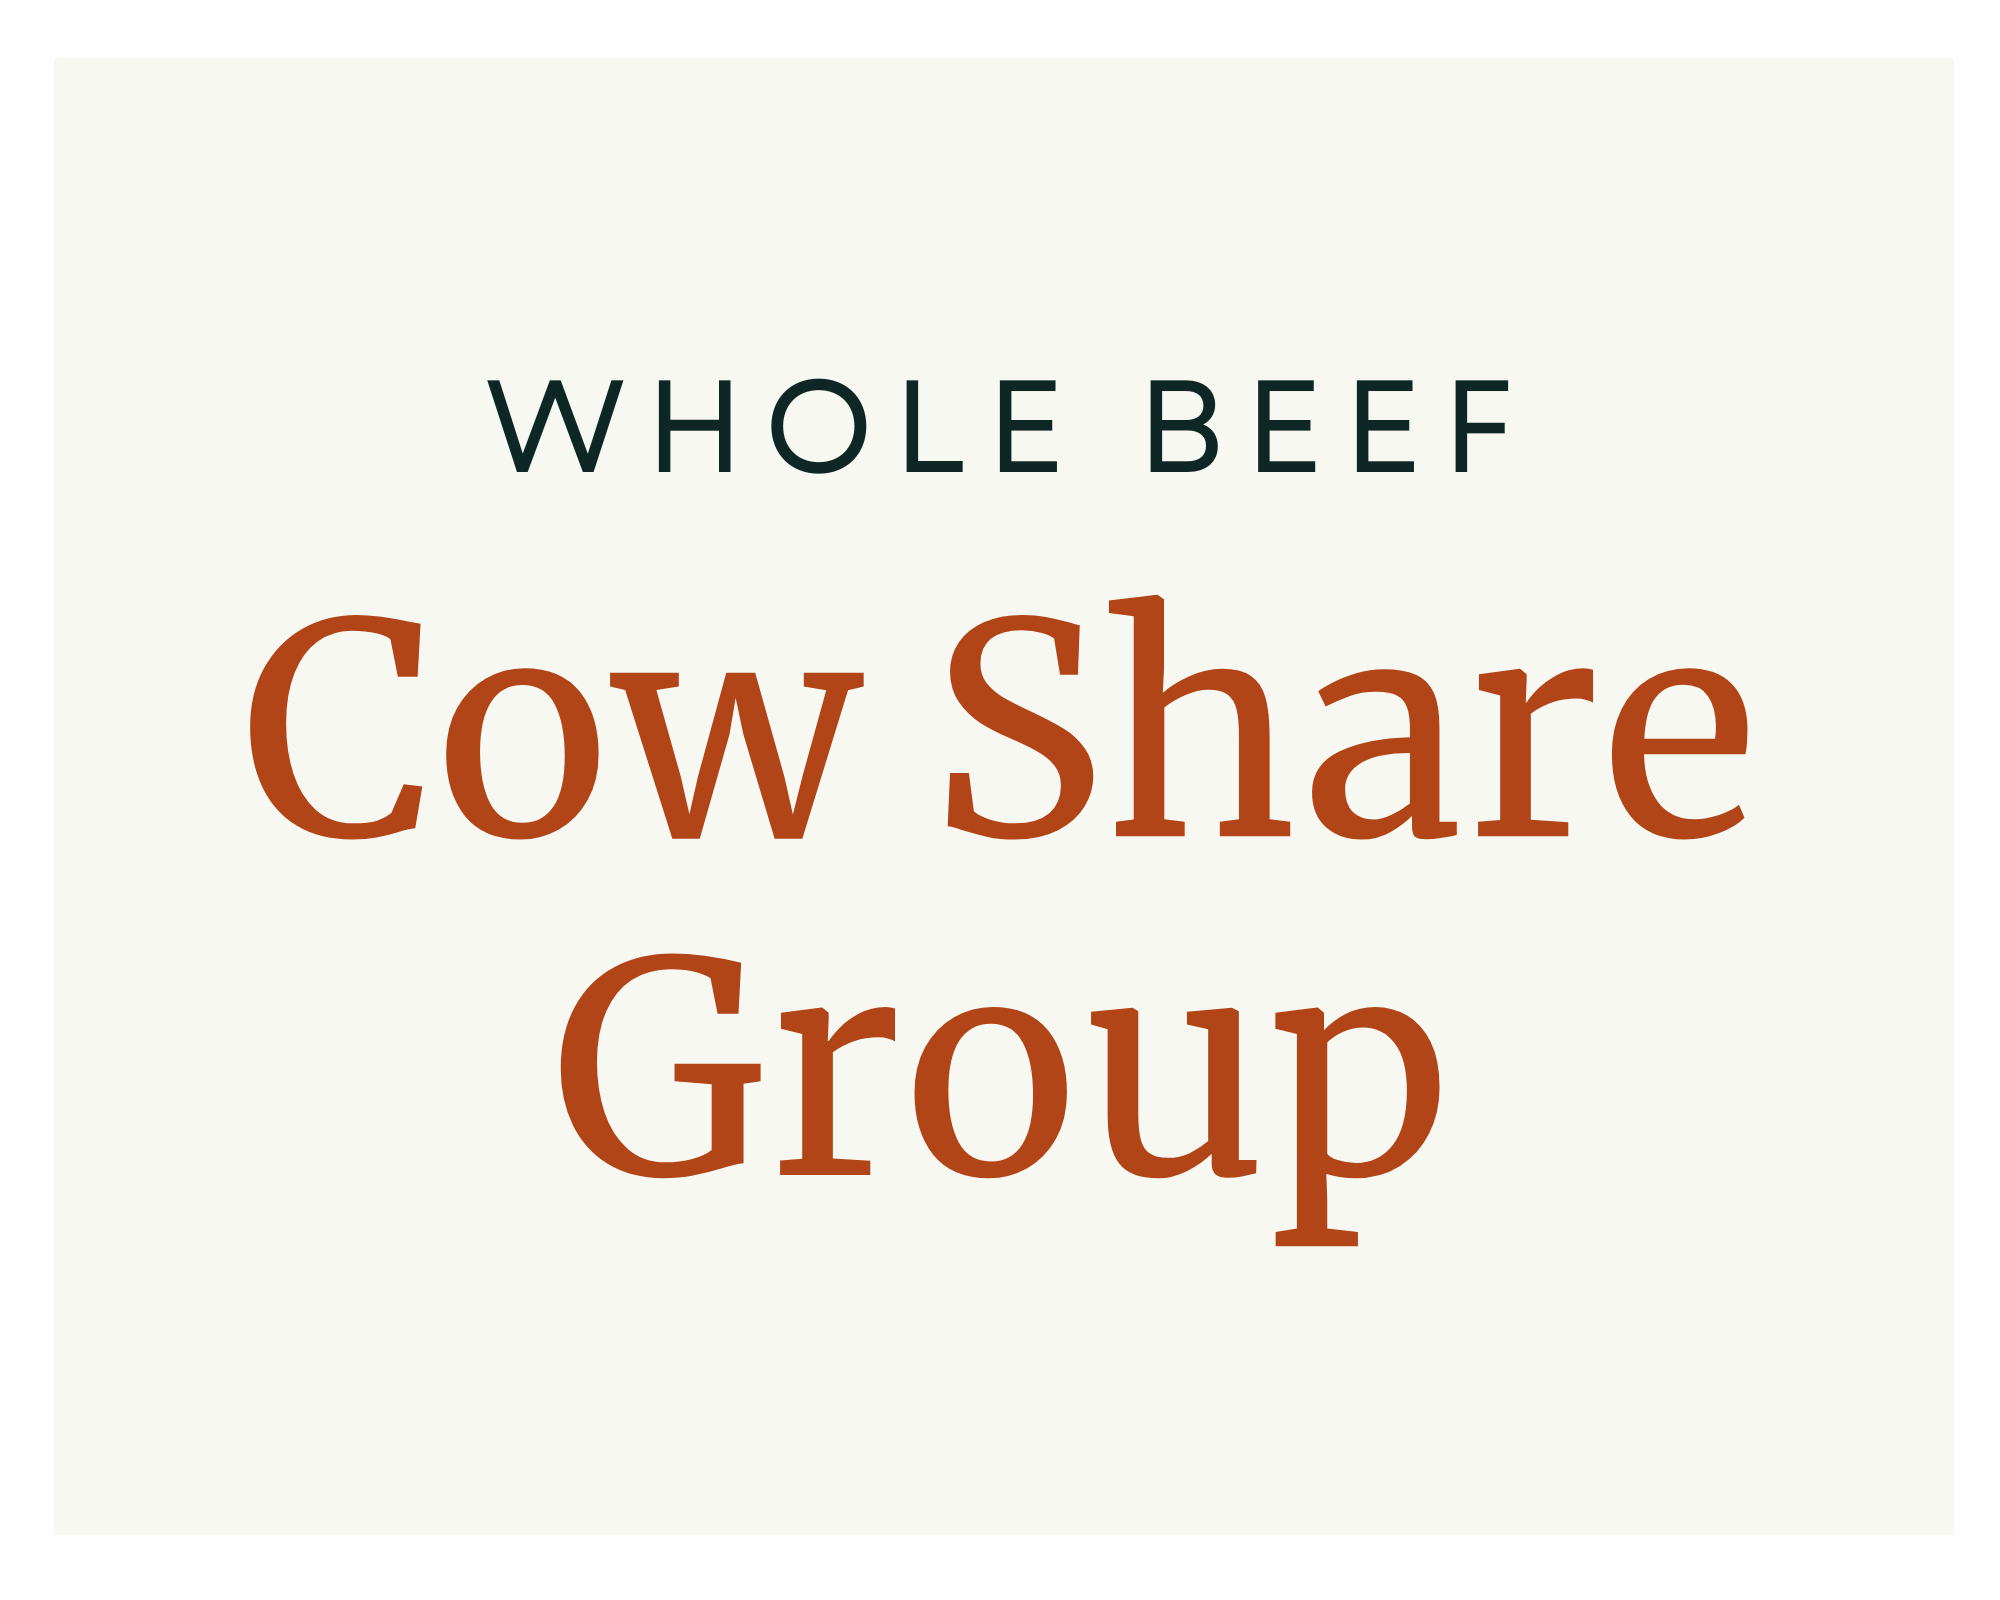 Template's Whole Beef Cow Share Group - Your Initial Deposit